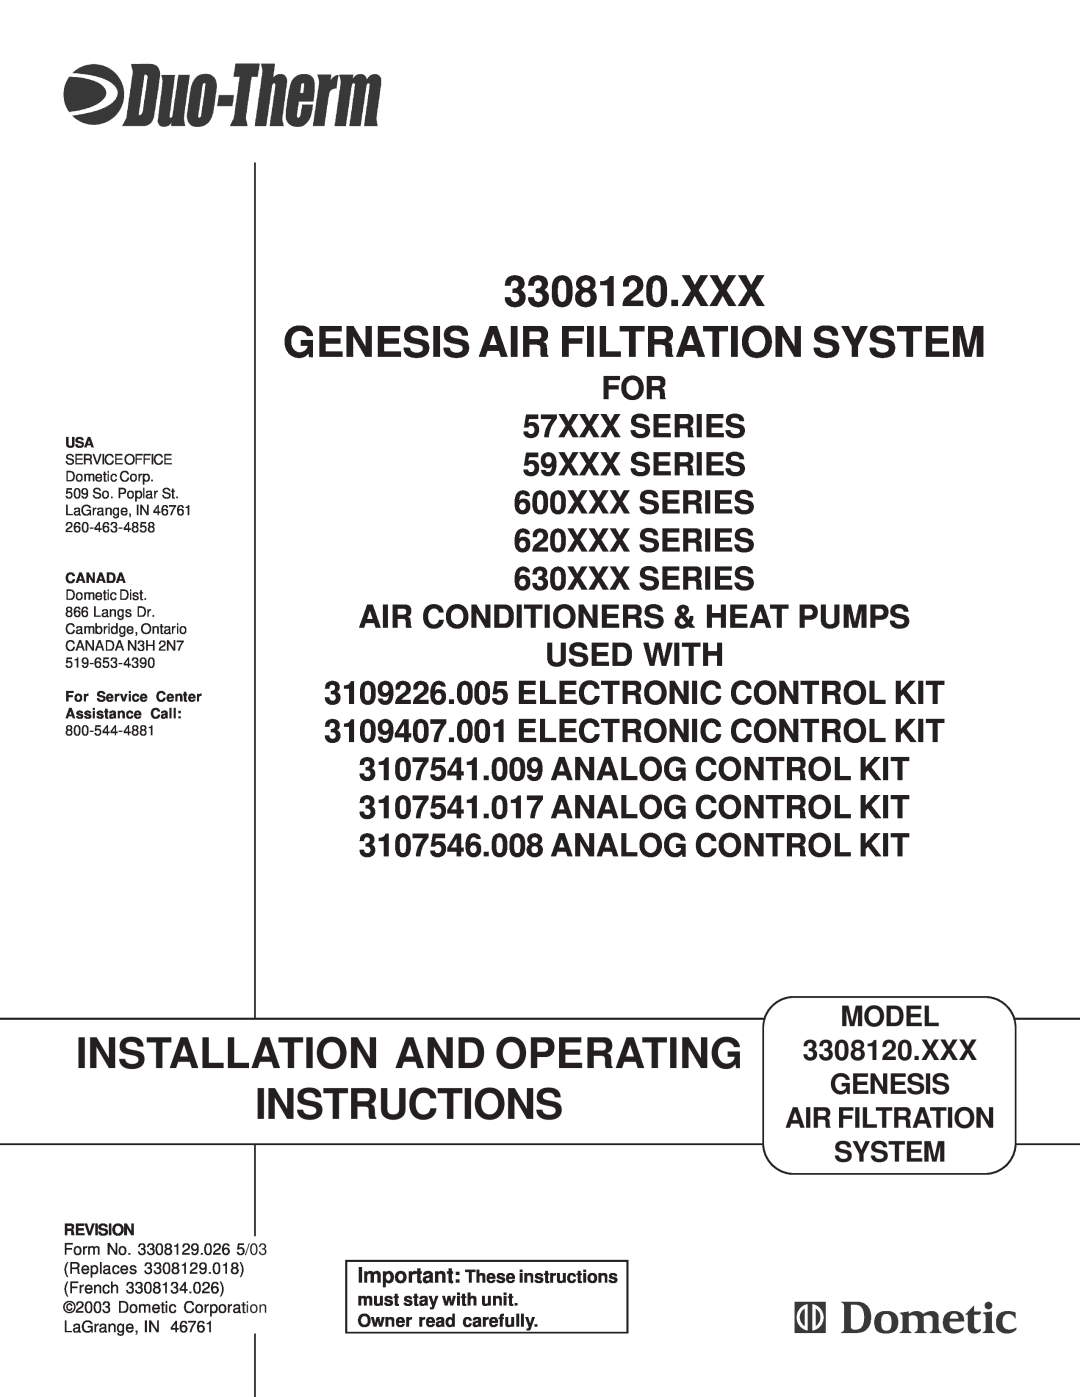 Dometic 3308120.XXX operating instructions Installation And Operating, Xxx Genesis Air Filtration System, 57XXX SERIES 